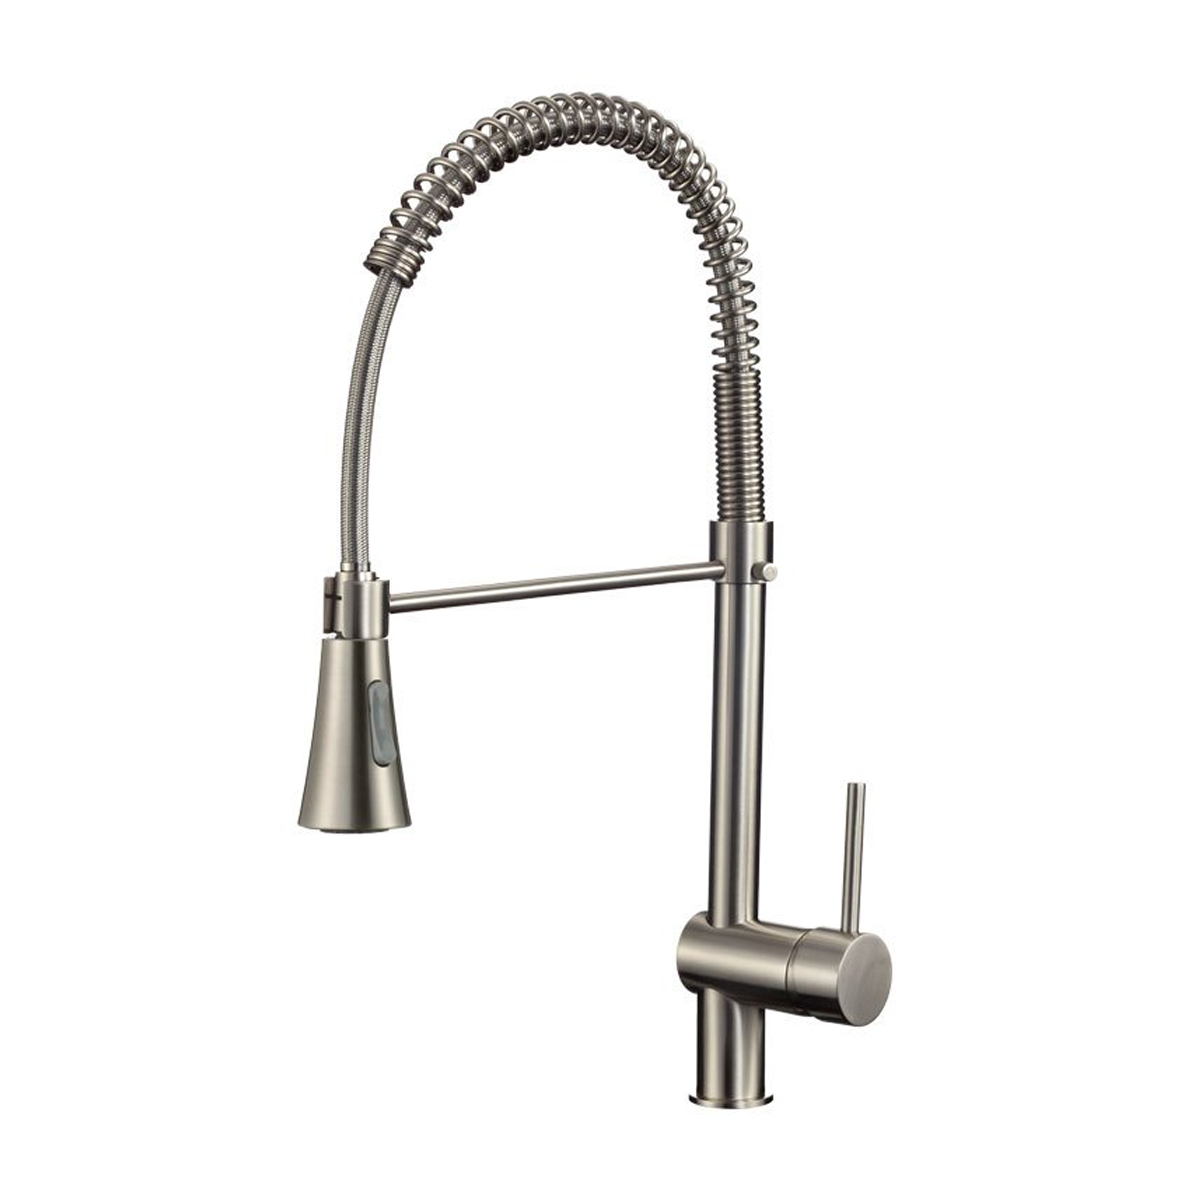 Pelican Int'l Fountain Series PL-8210 Single Hole Commercial Style Pull Down Kitchen Faucet In Brushed Nickel